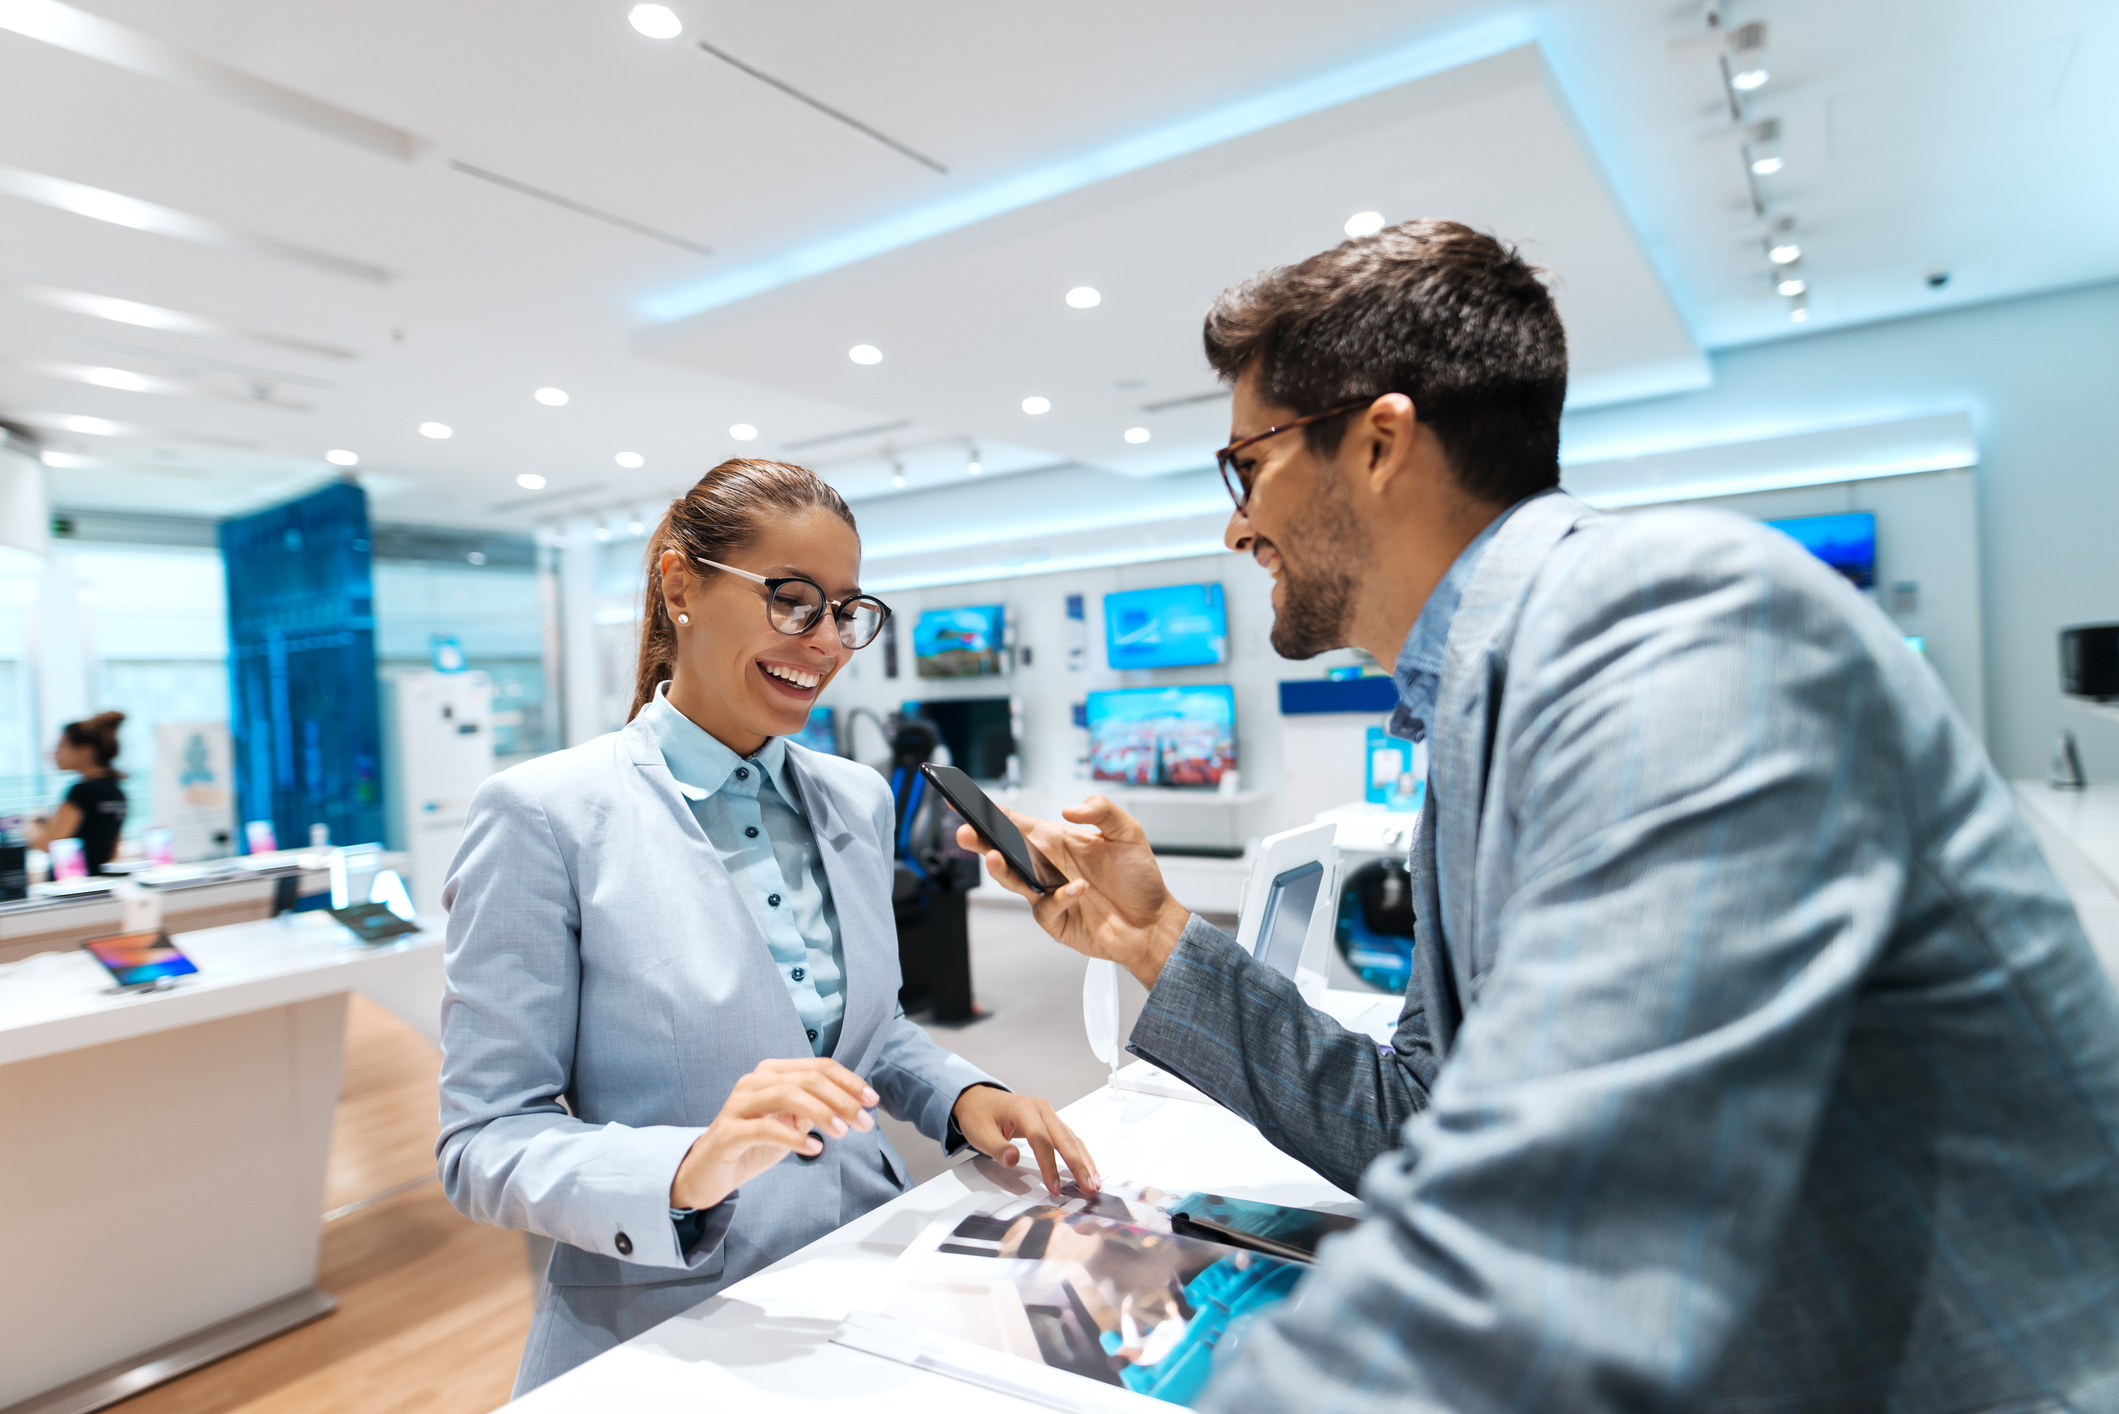 Discover the Ultimate Connectivity Hub at AT&T Plano